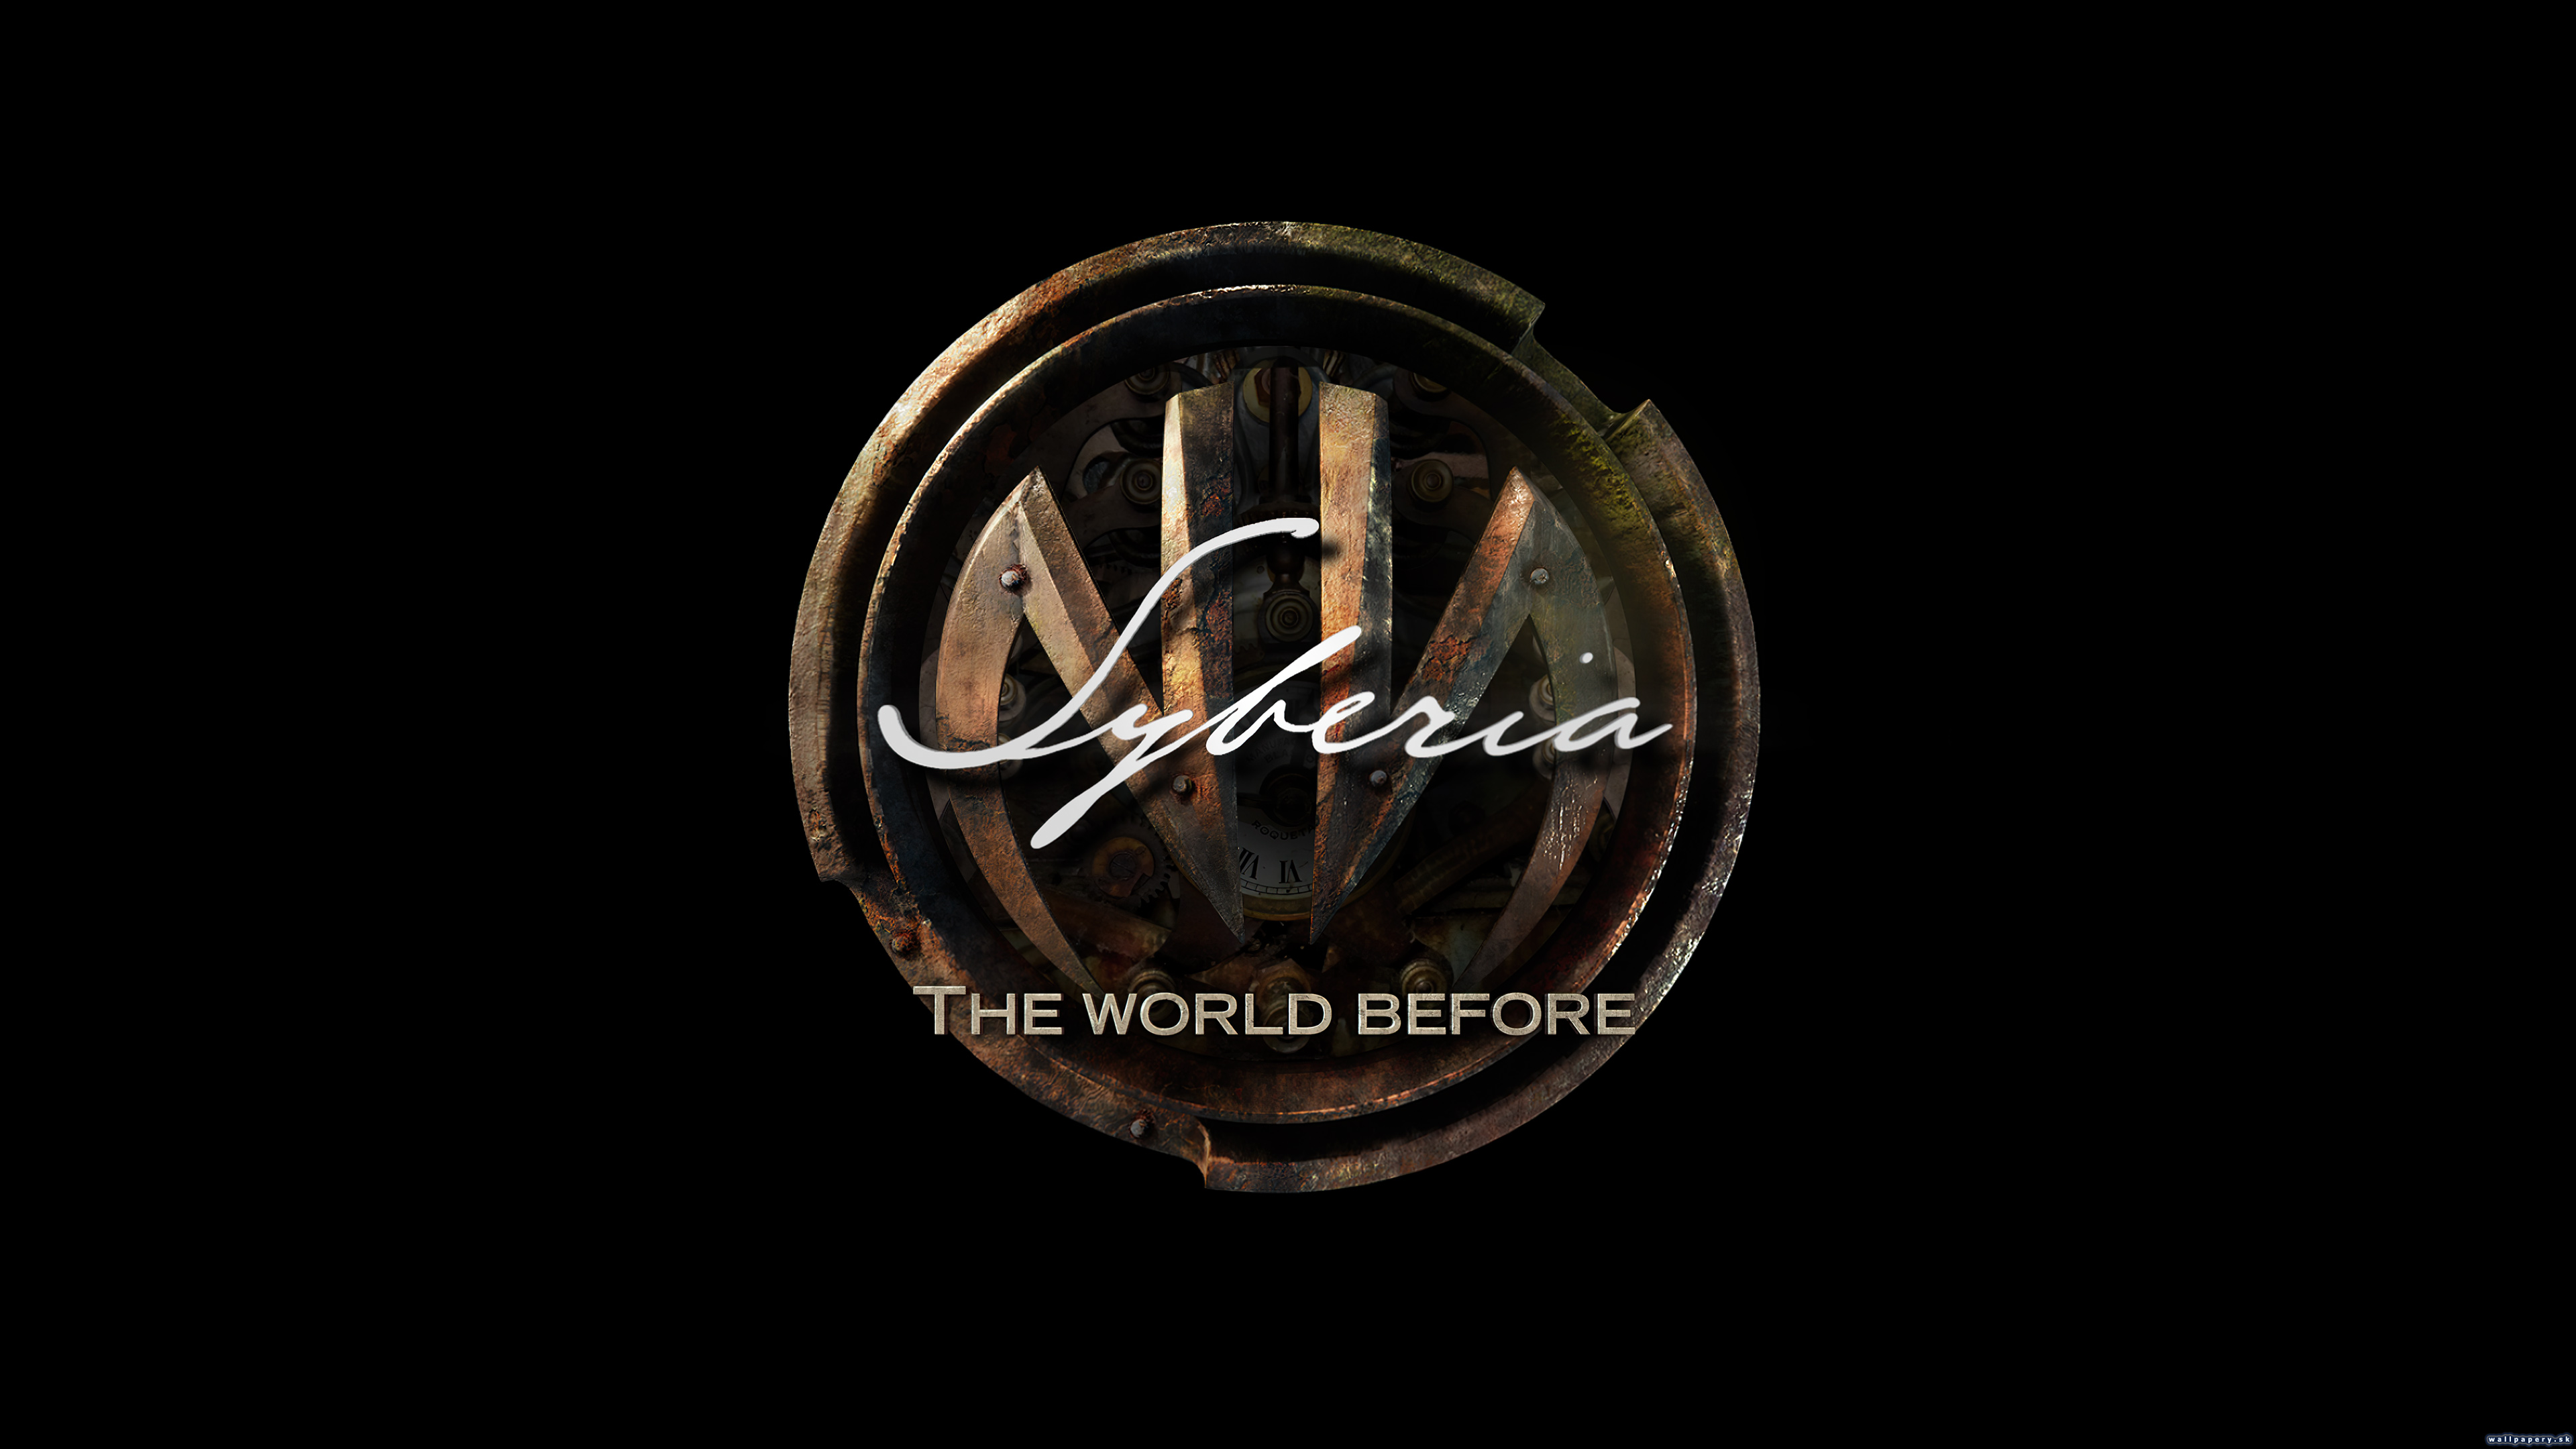 Syberia: The World Before - wallpaper 2